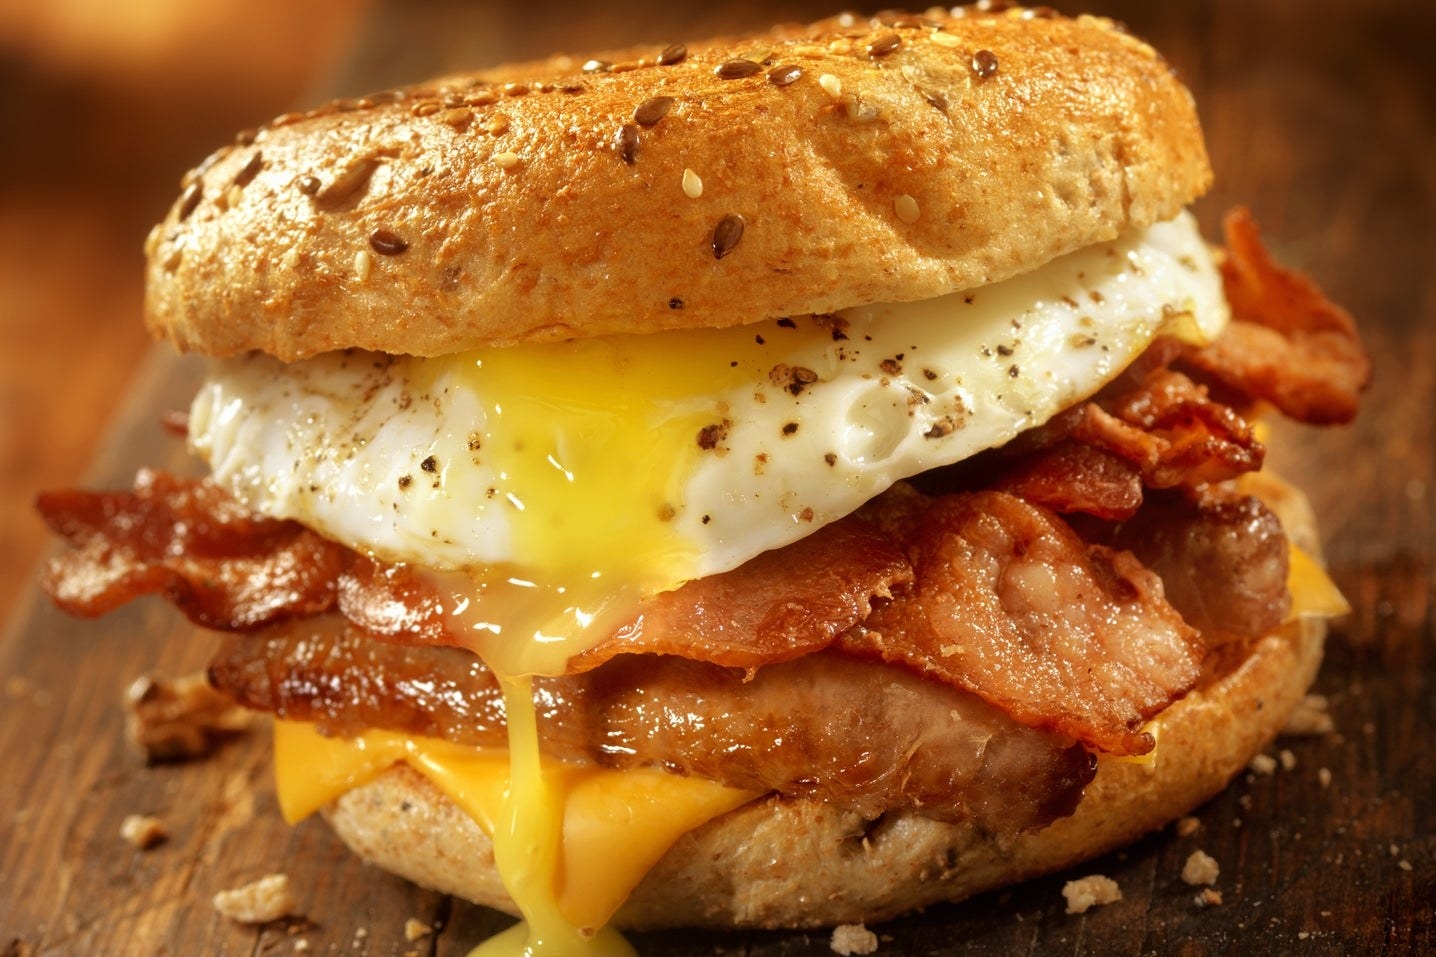 Breakfast sandwich with eggs, bacon, and cheese.